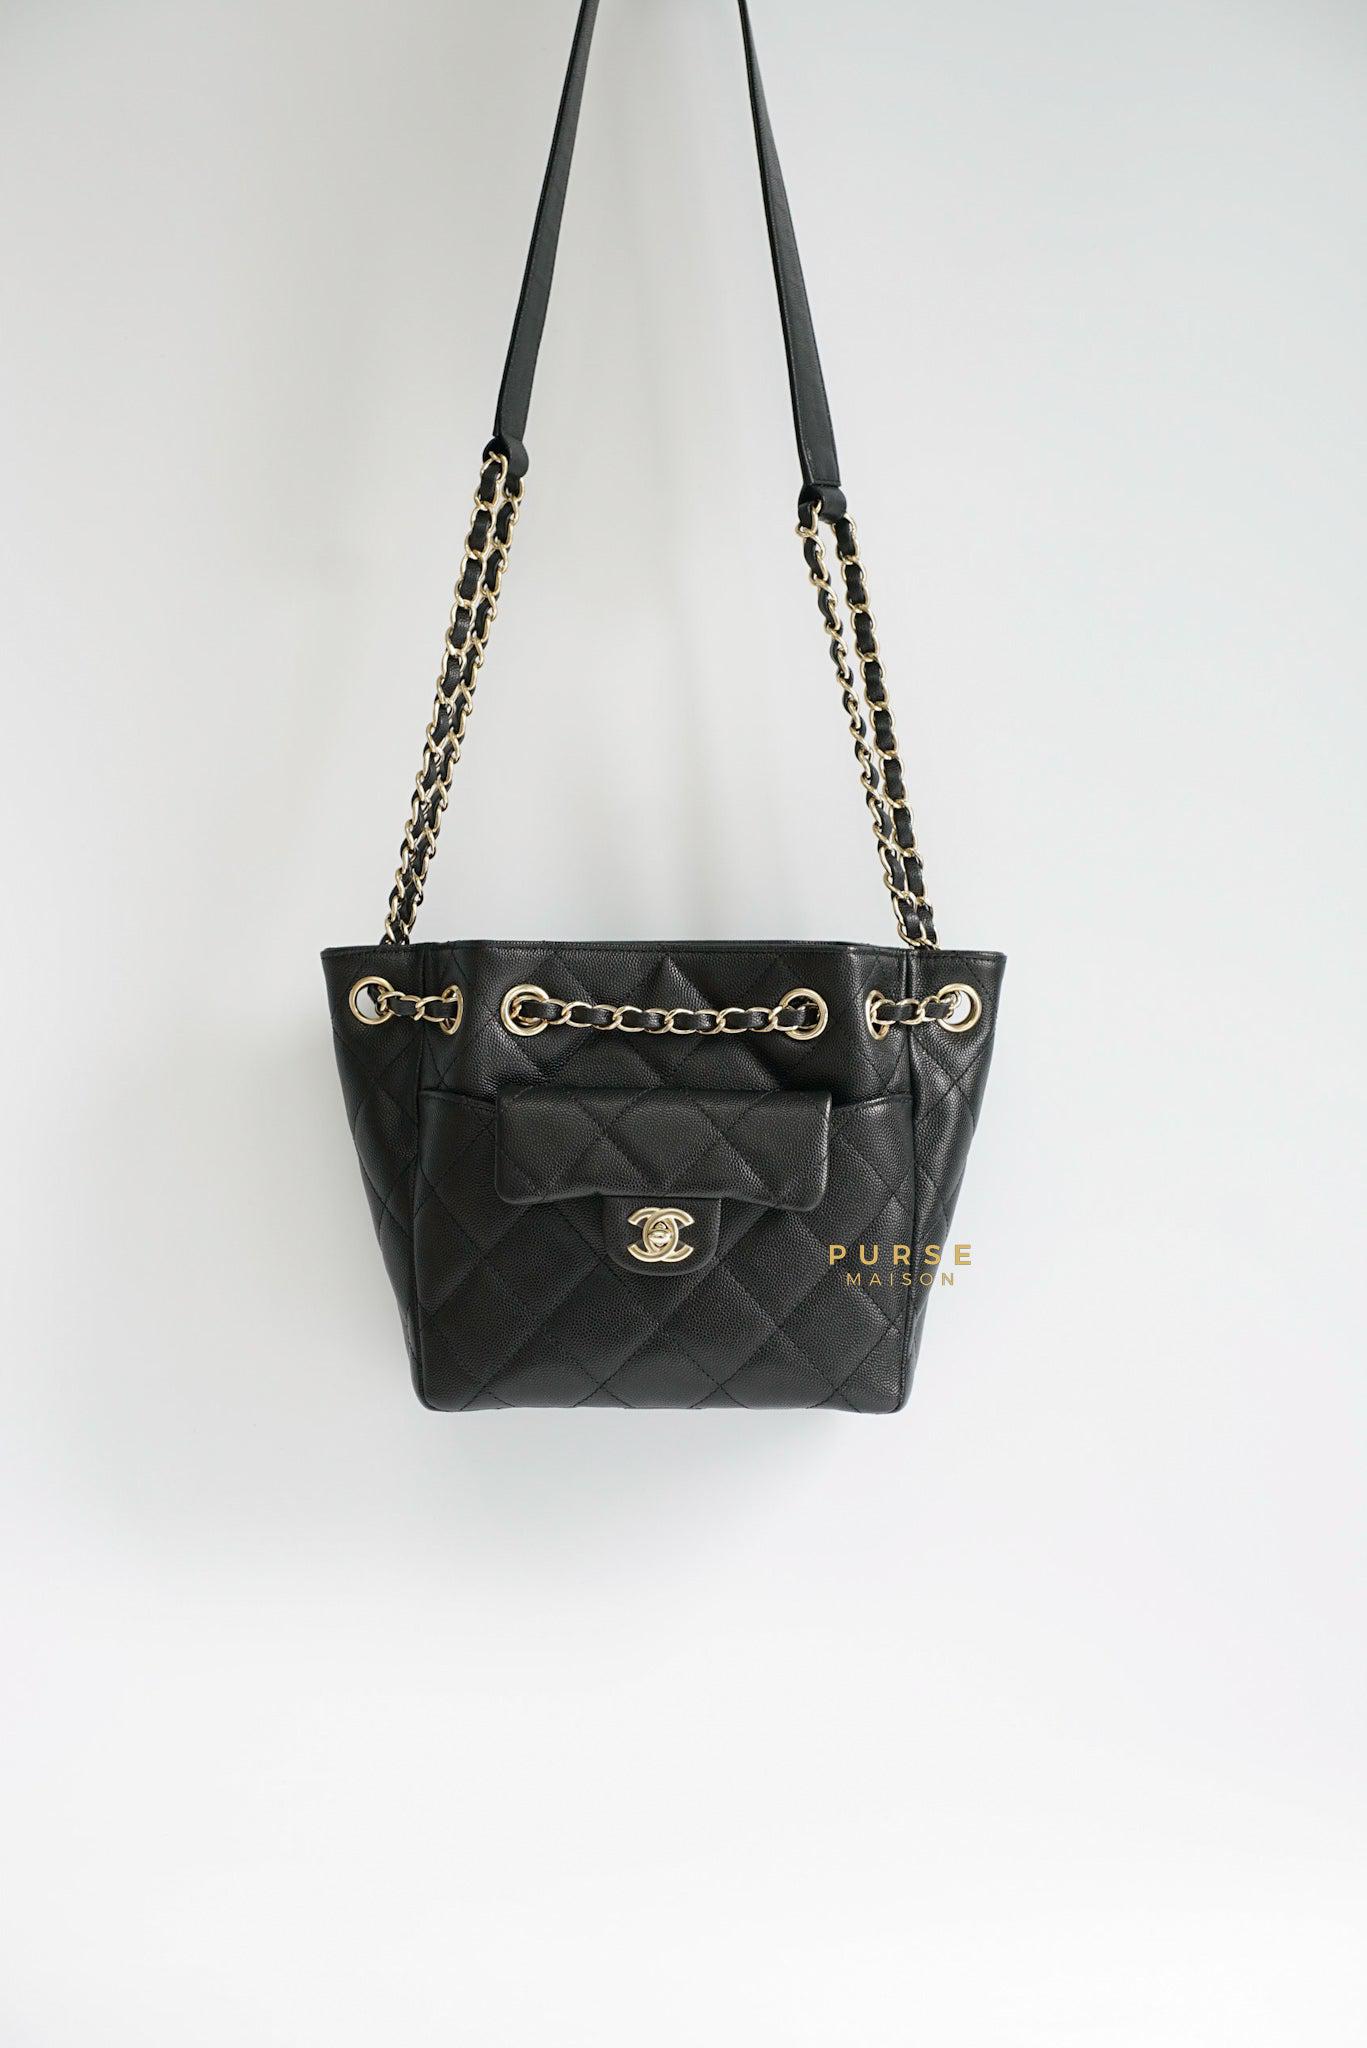 CHANEL Black Small Trendy Flap Bag Microchipped Light Gold